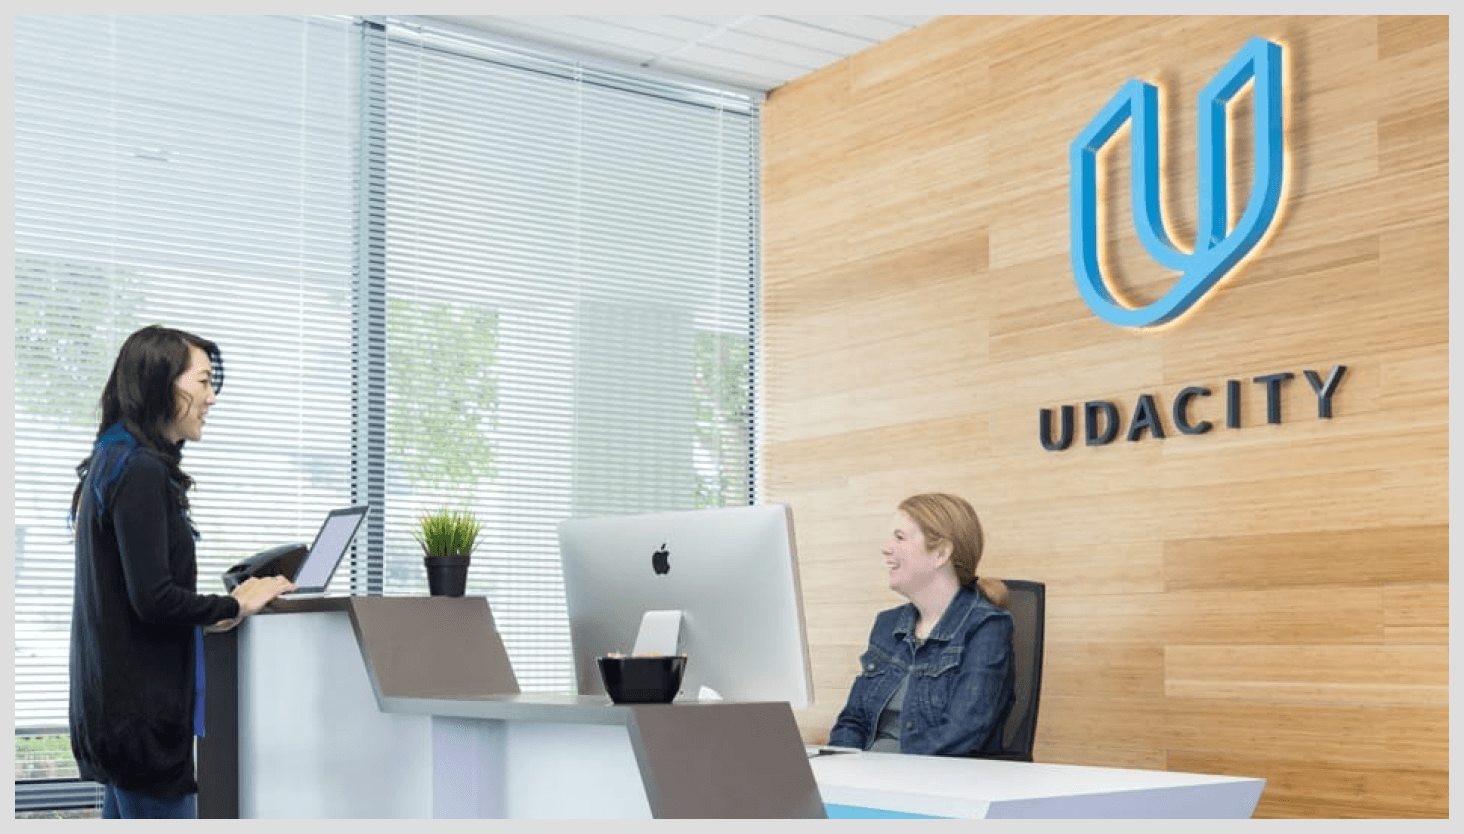 Two women in the Udacity lobby front desk area